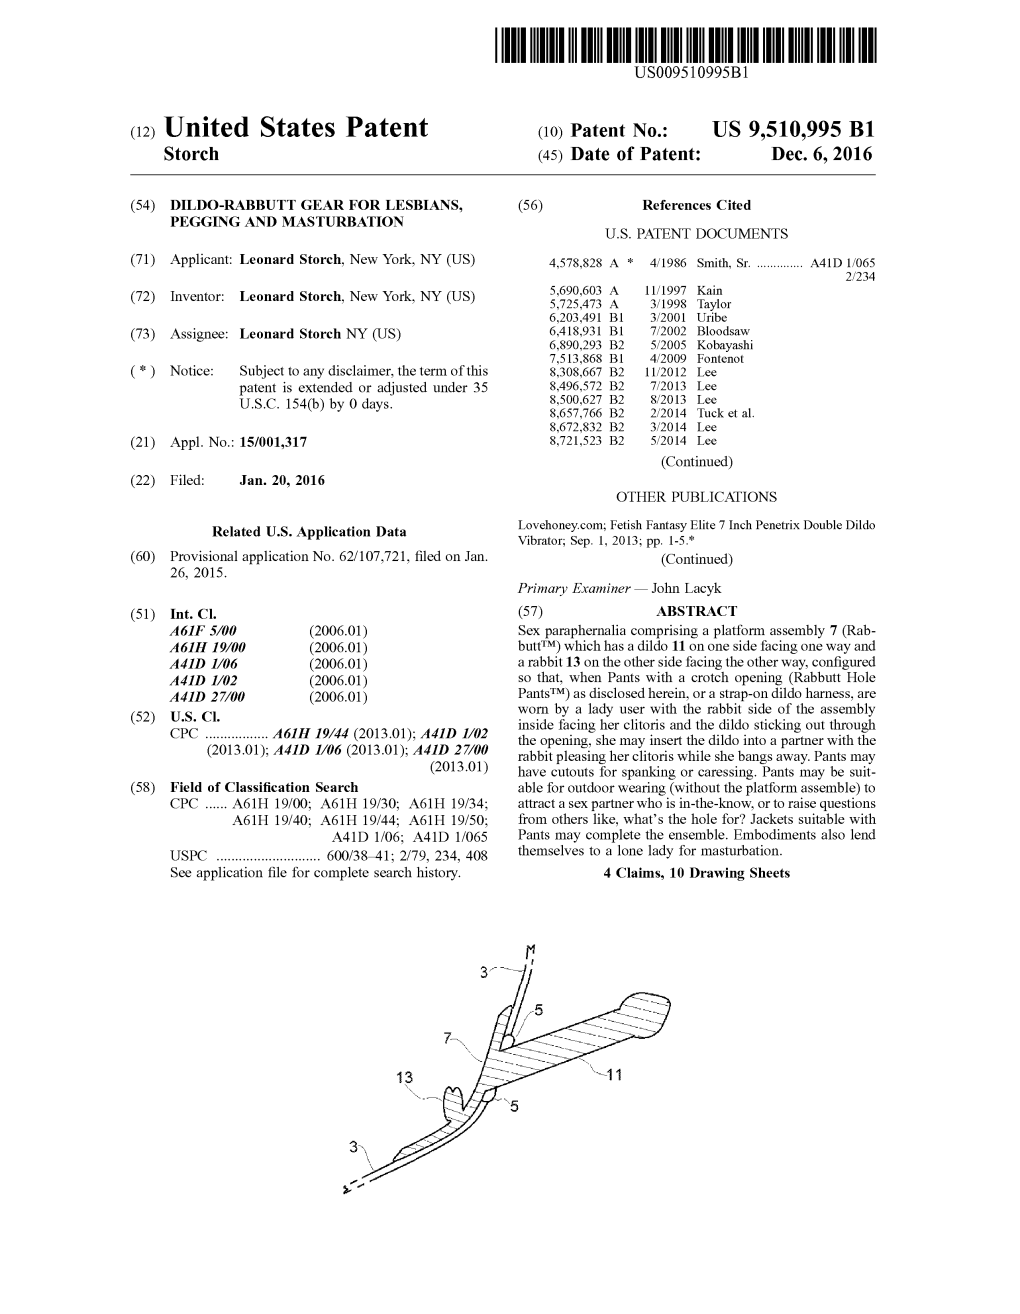 (12) United States Patent (10) Patent No.: US 9,510,995 B1 Storch (45) Date of Patent: Dec